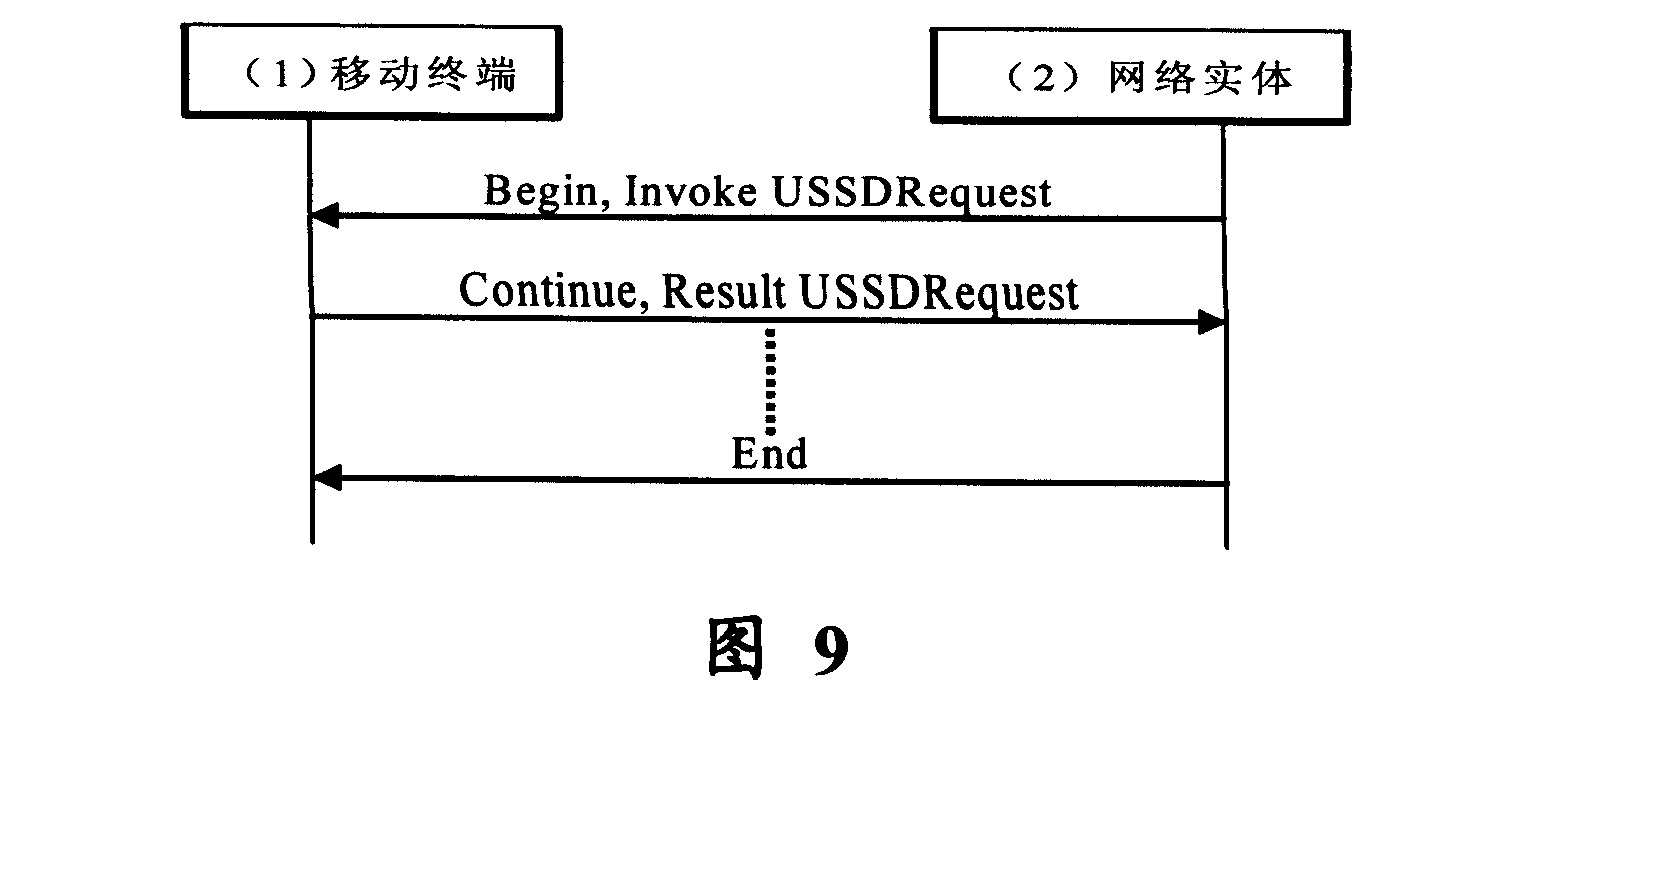 Information service method and system based on USSD protocol